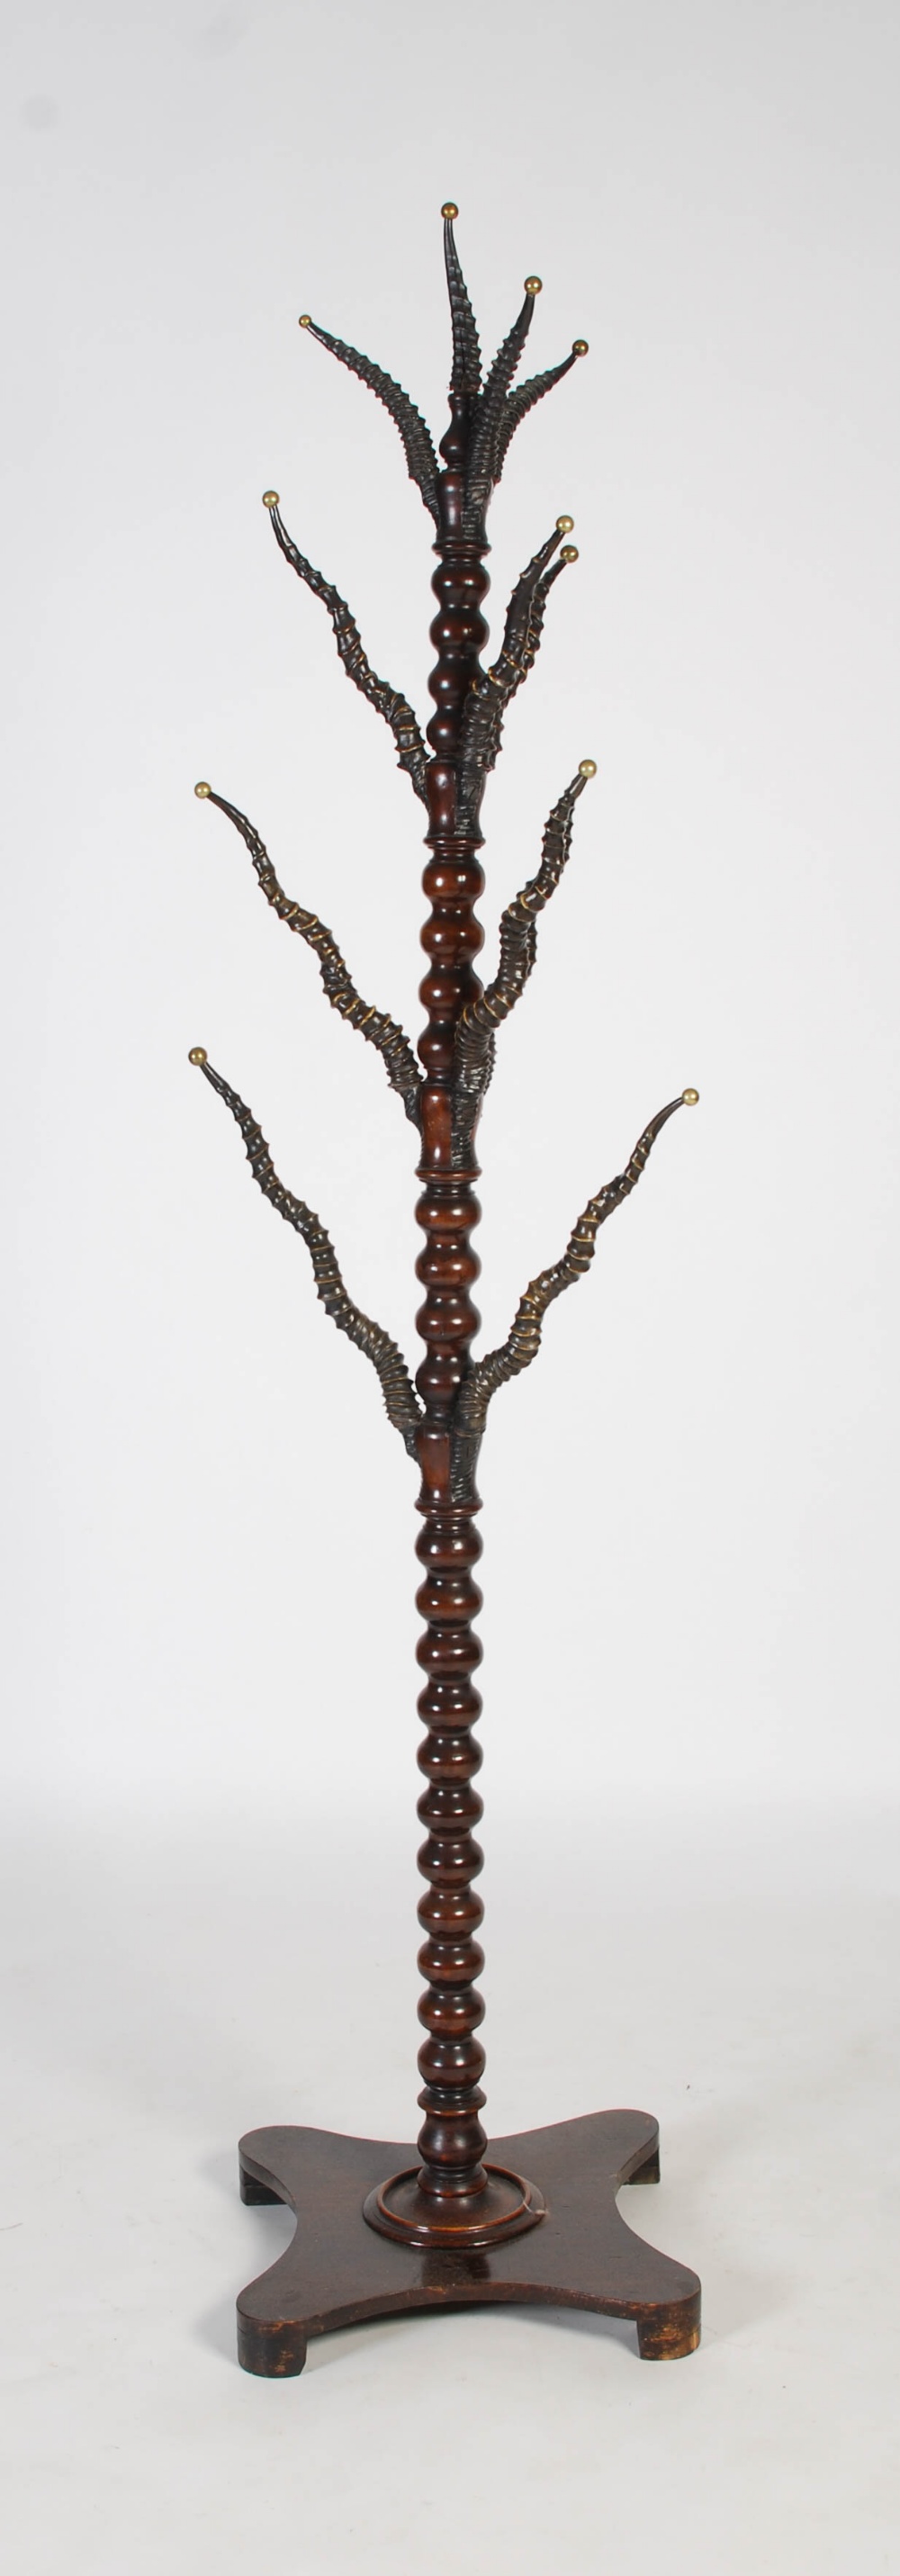 A late 19th / early 20th century turned mahogany and antelope horn mounted coat stand, the horns